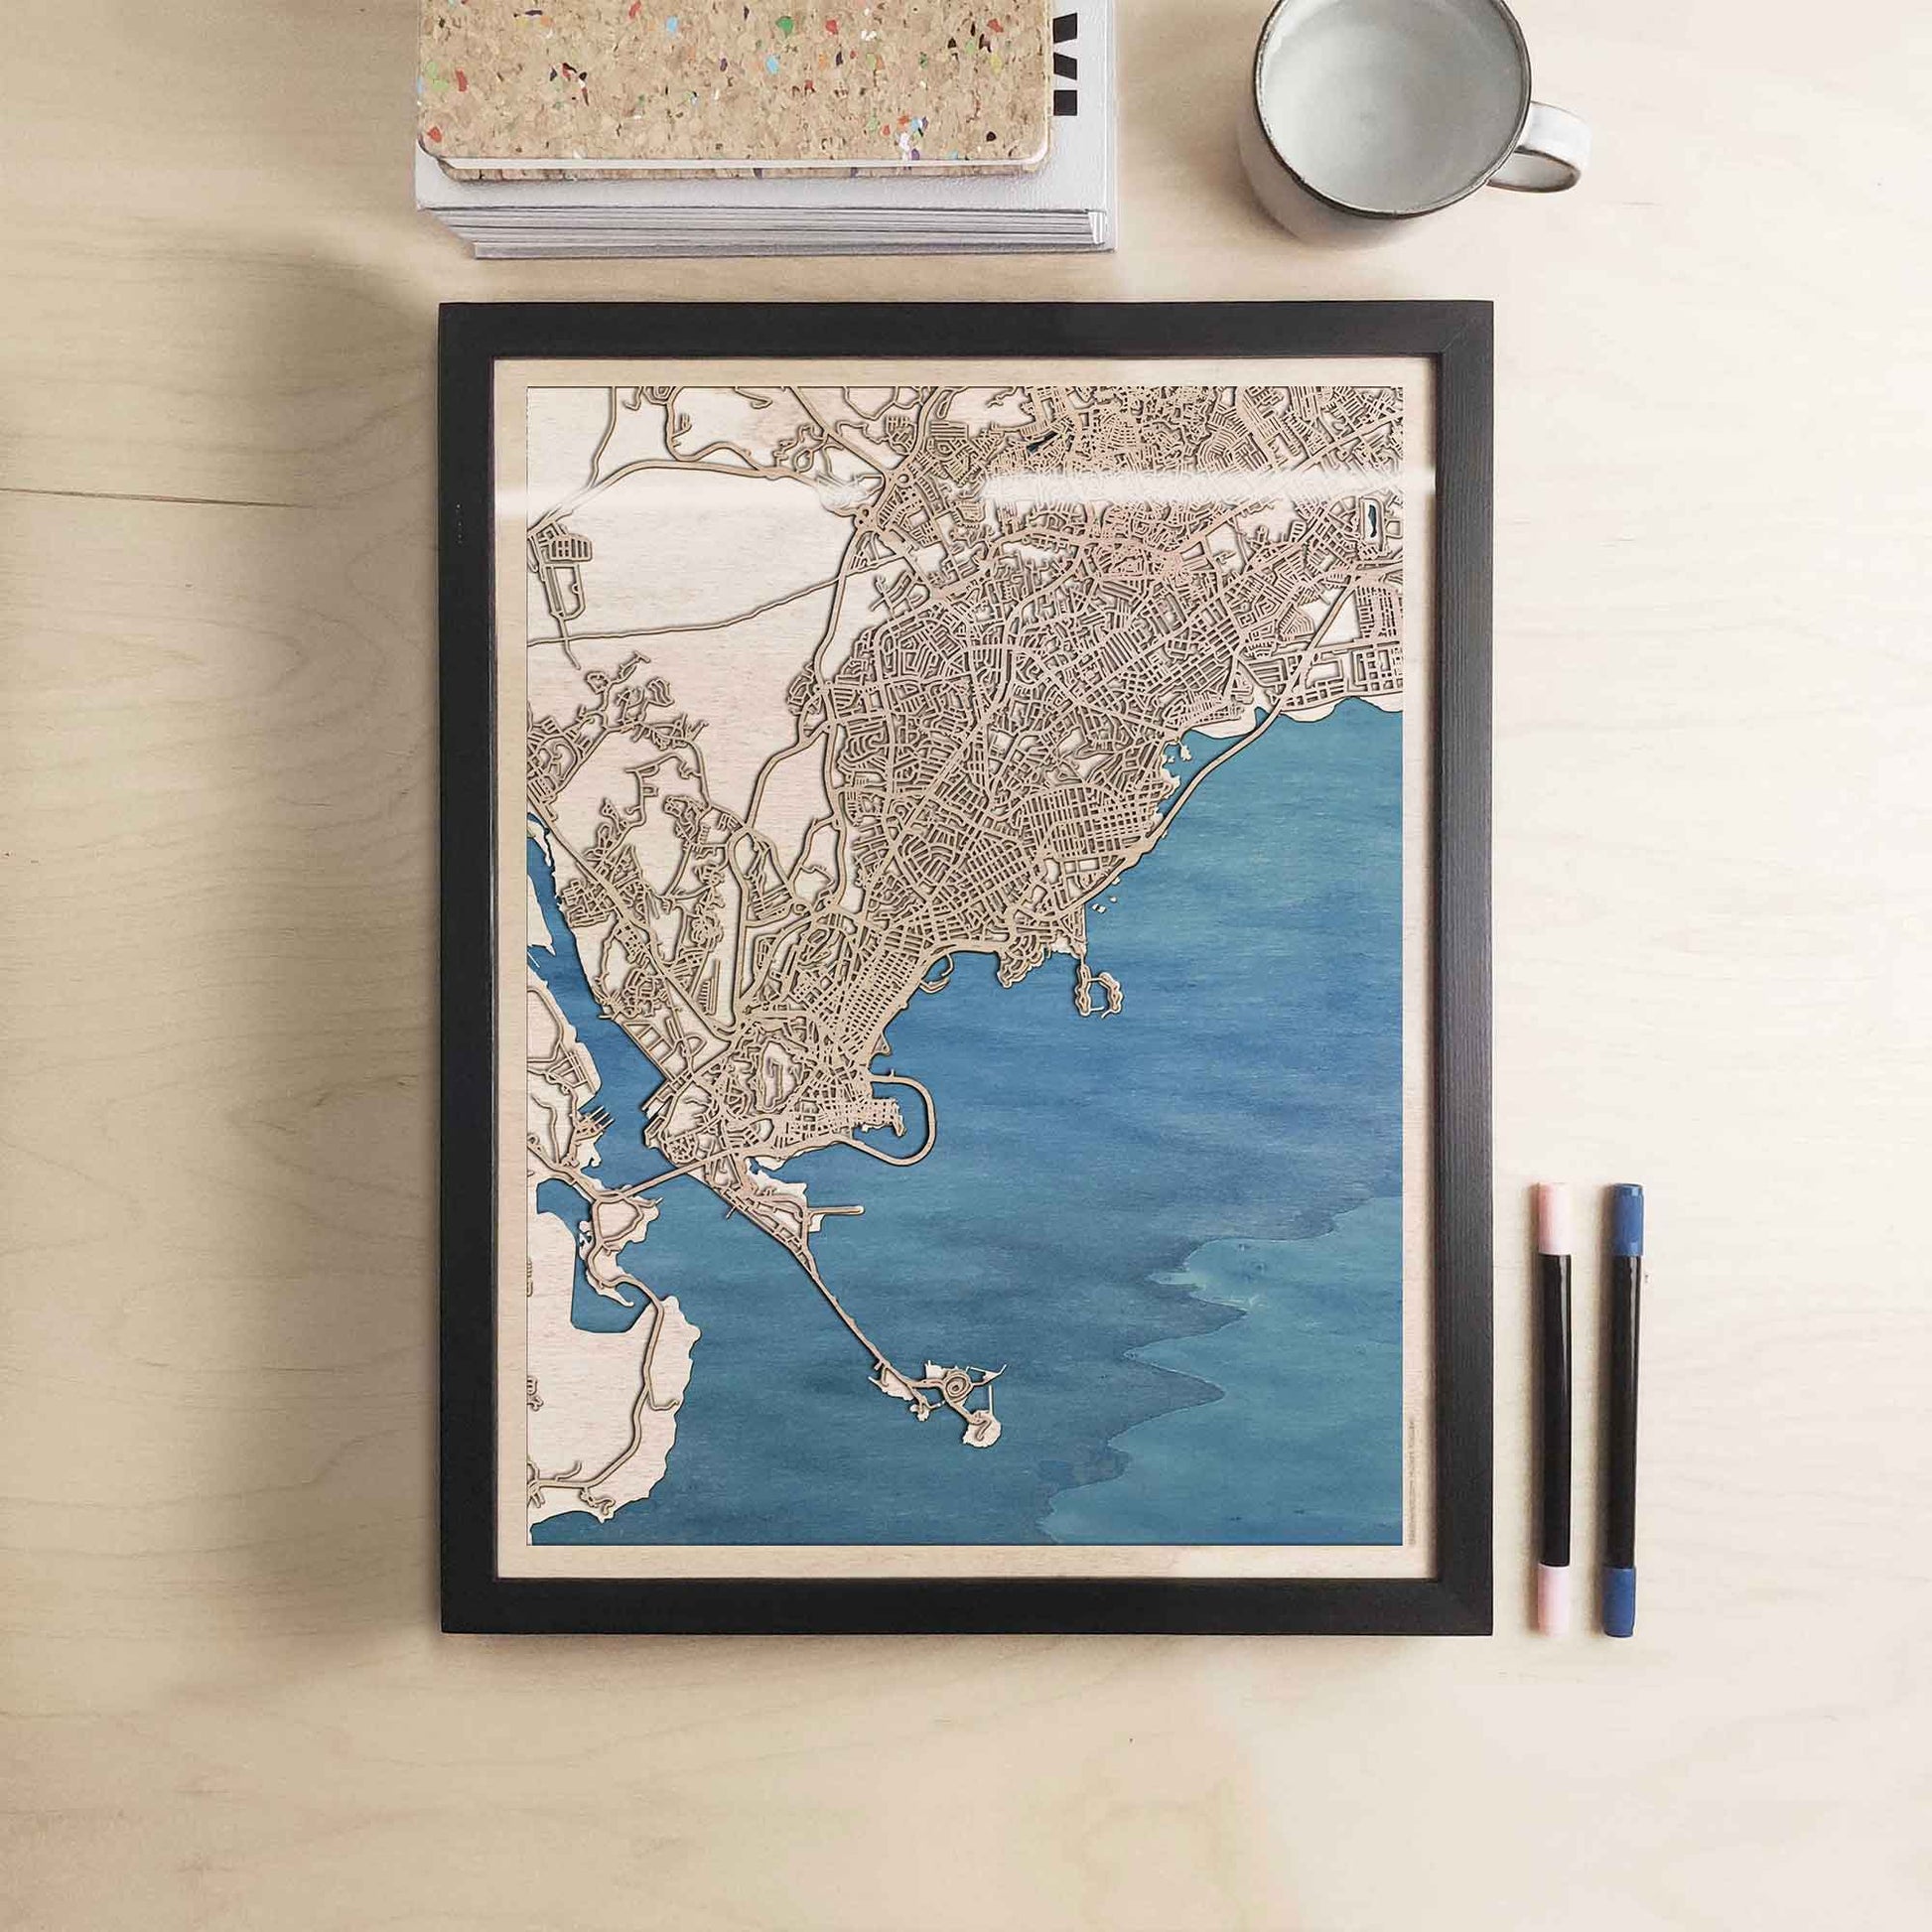 Panama Wooden Map by CityWood - Custom Wood Map Art - Unique Laser Cut Engraved - Anniversary Gift